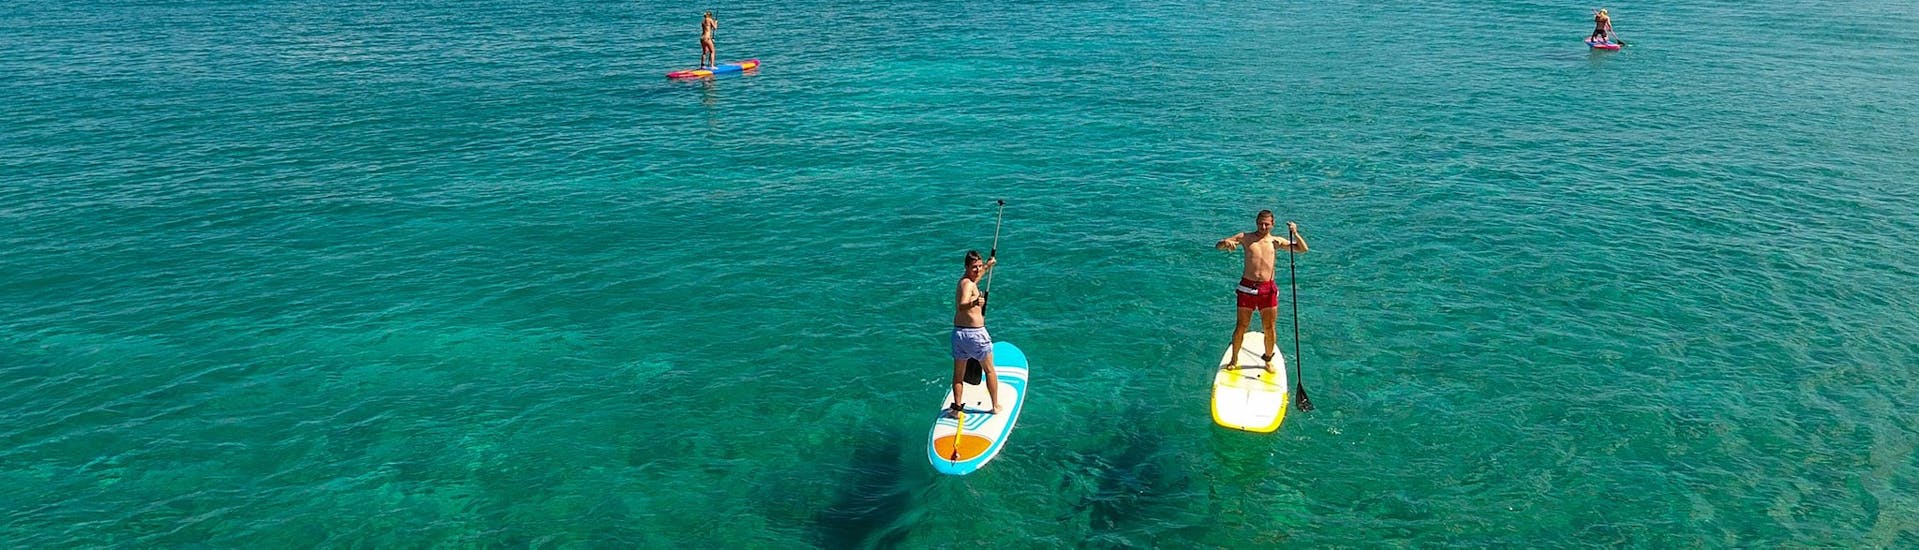 Two guys on an SUP from the SUP Hire at Paradise Beach in Kos with Water Club Paradise Beach Kos.